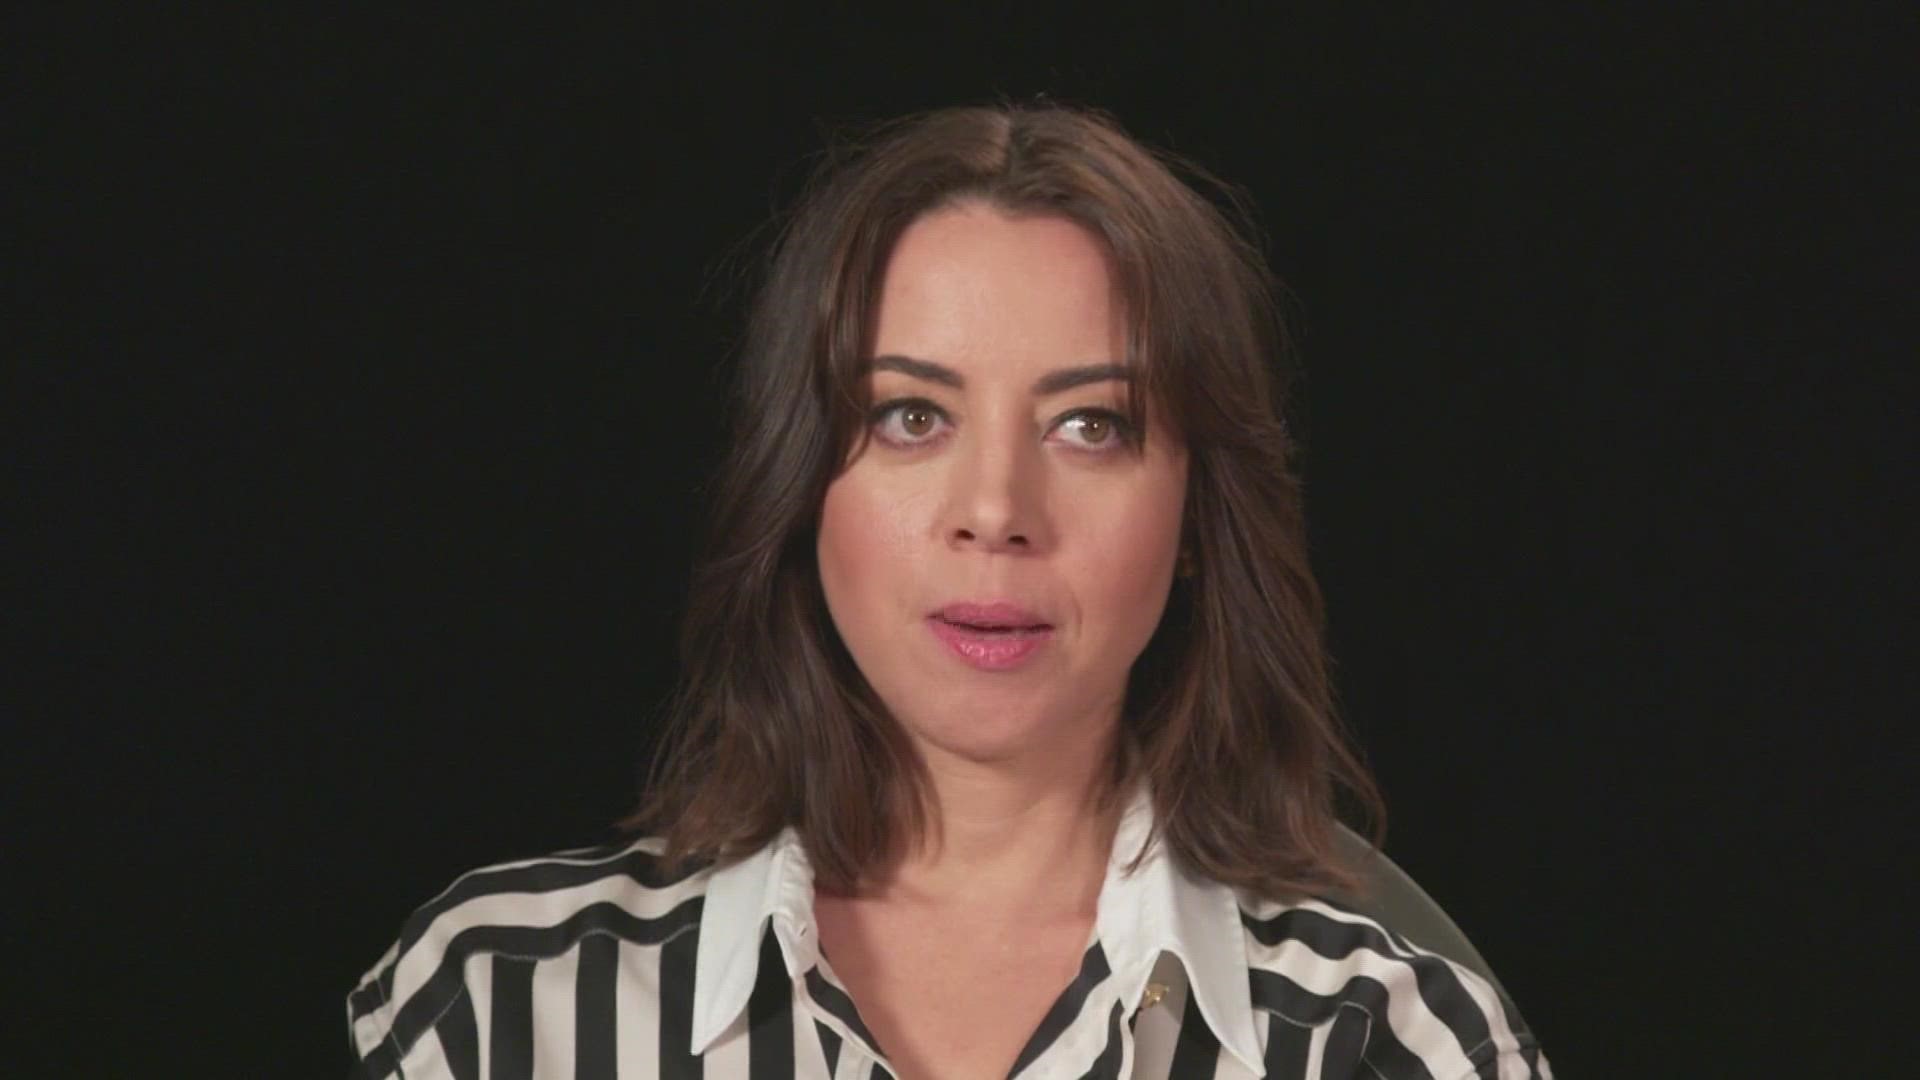 Aubrey Plaza News, Pictures, and Videos - E! Online